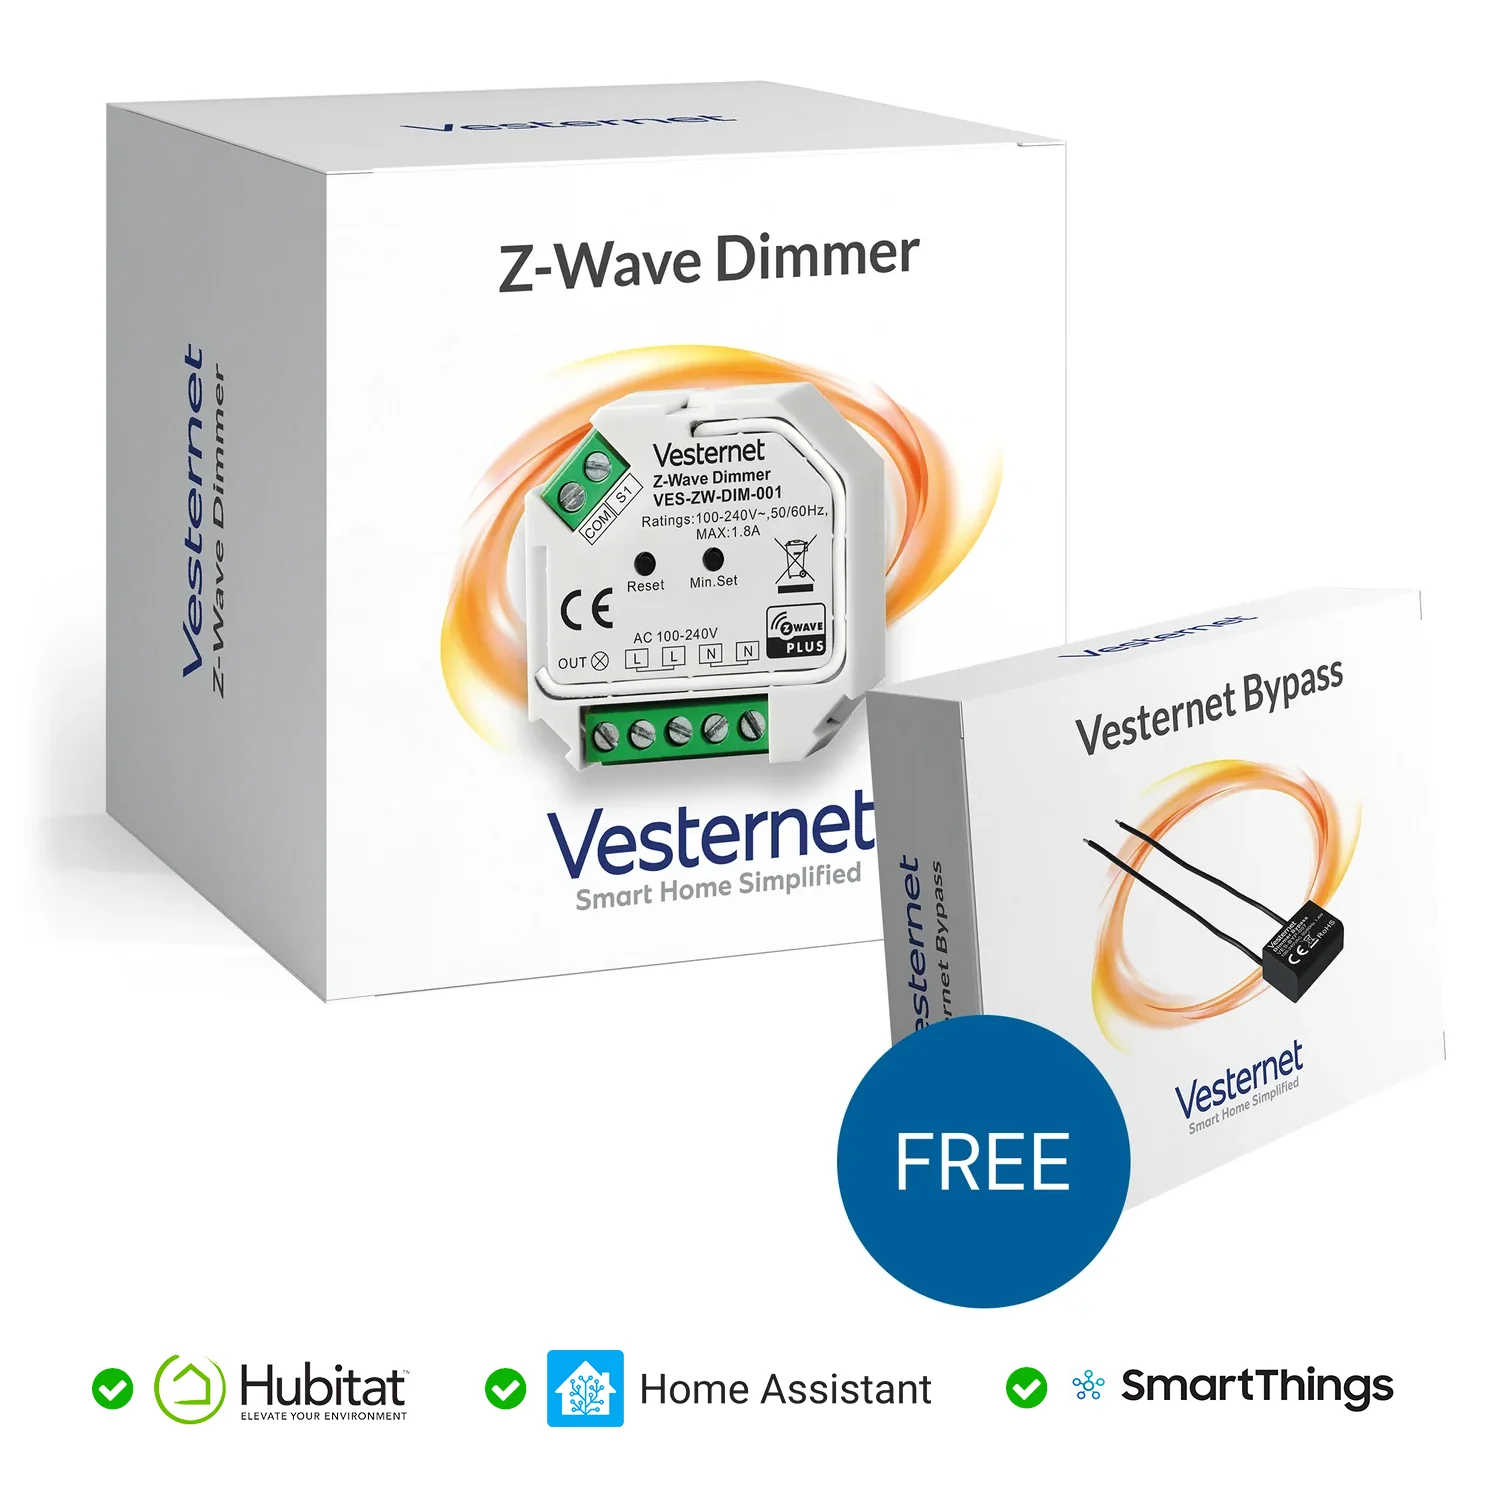 Vesternet Z-Wave Dimmer Questions & Answers